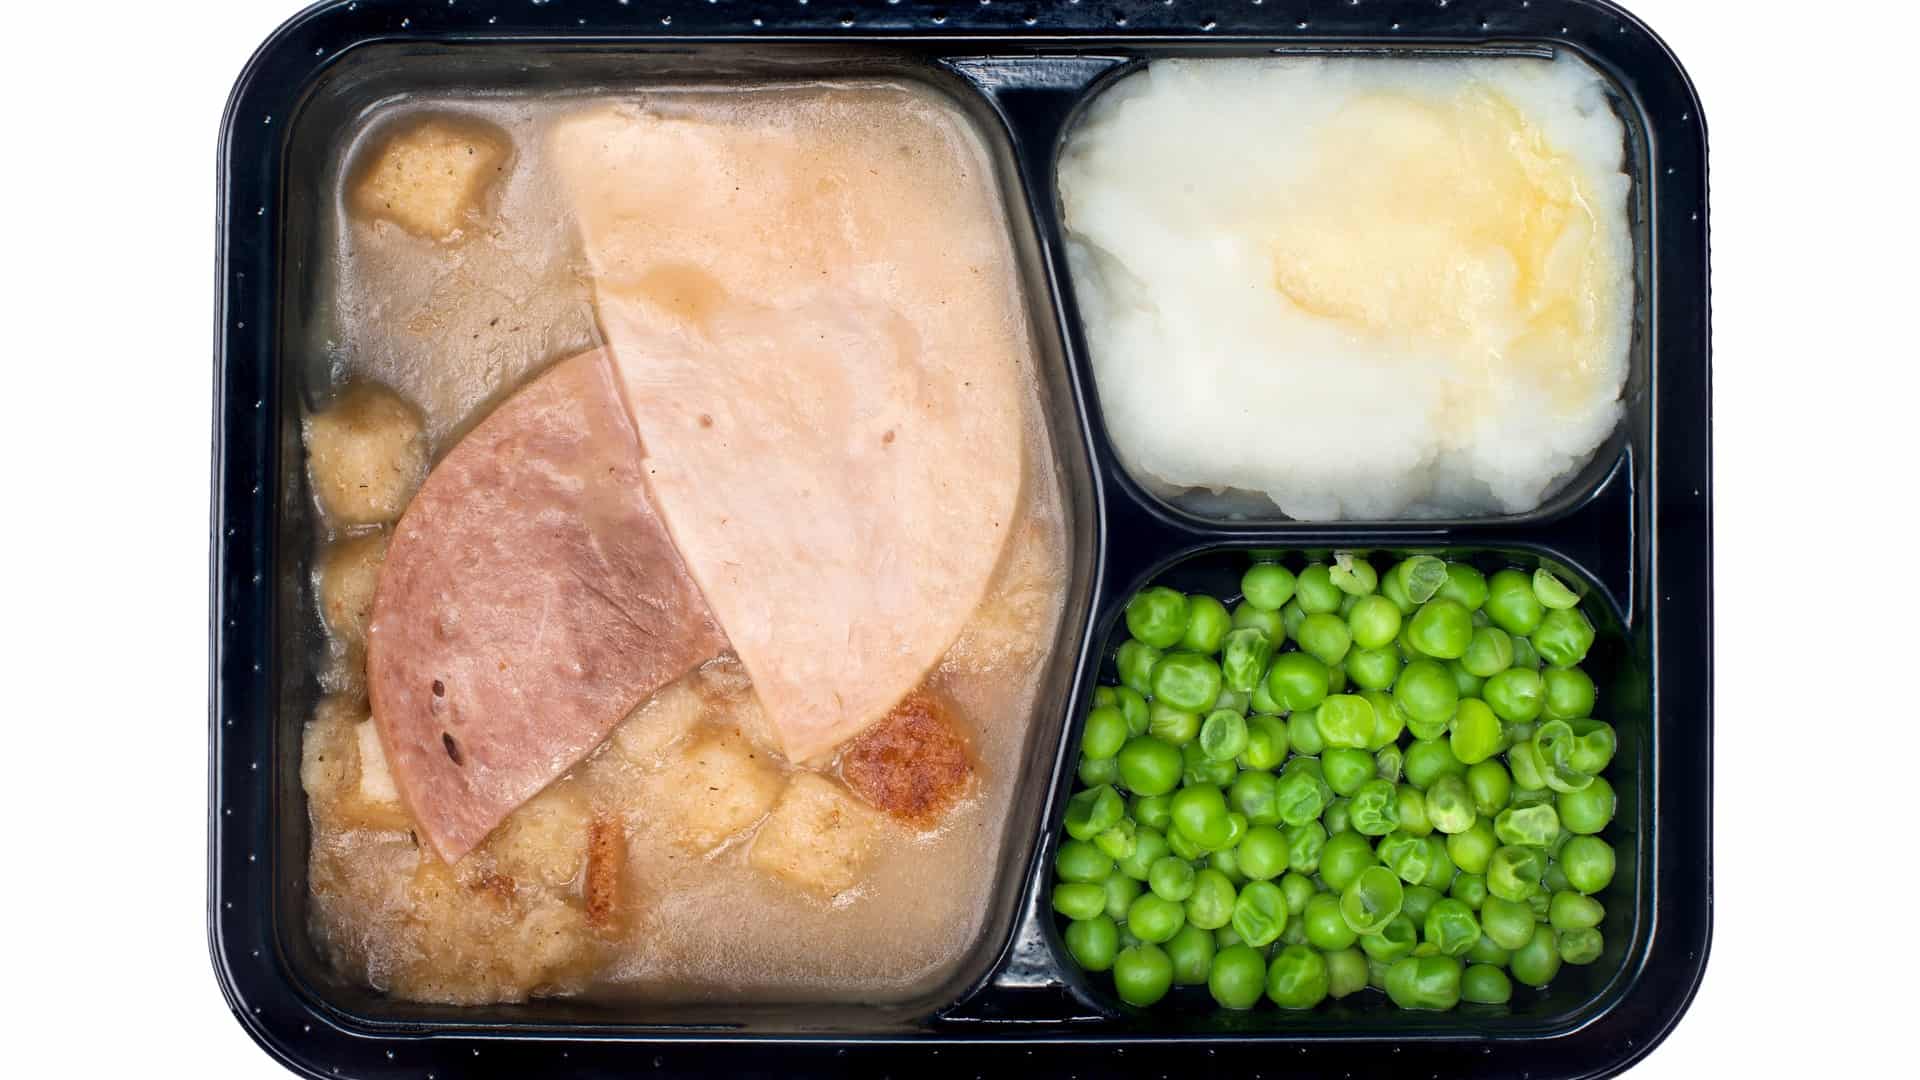 Microwave turkey dinner with mashed potatoes and peas